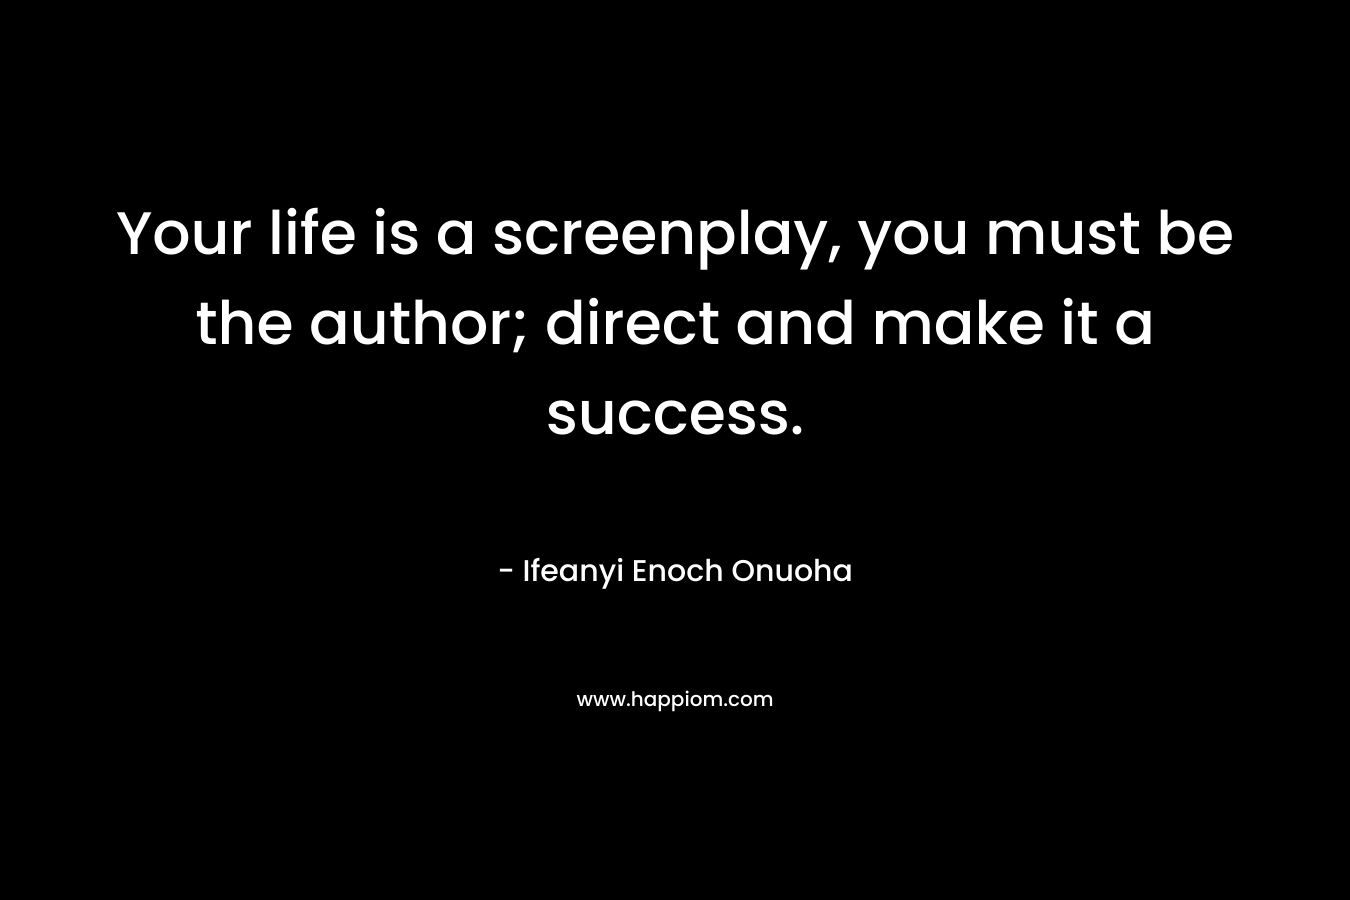 Your life is a screenplay, you must be the author; direct and make it a success. – Ifeanyi Enoch Onuoha